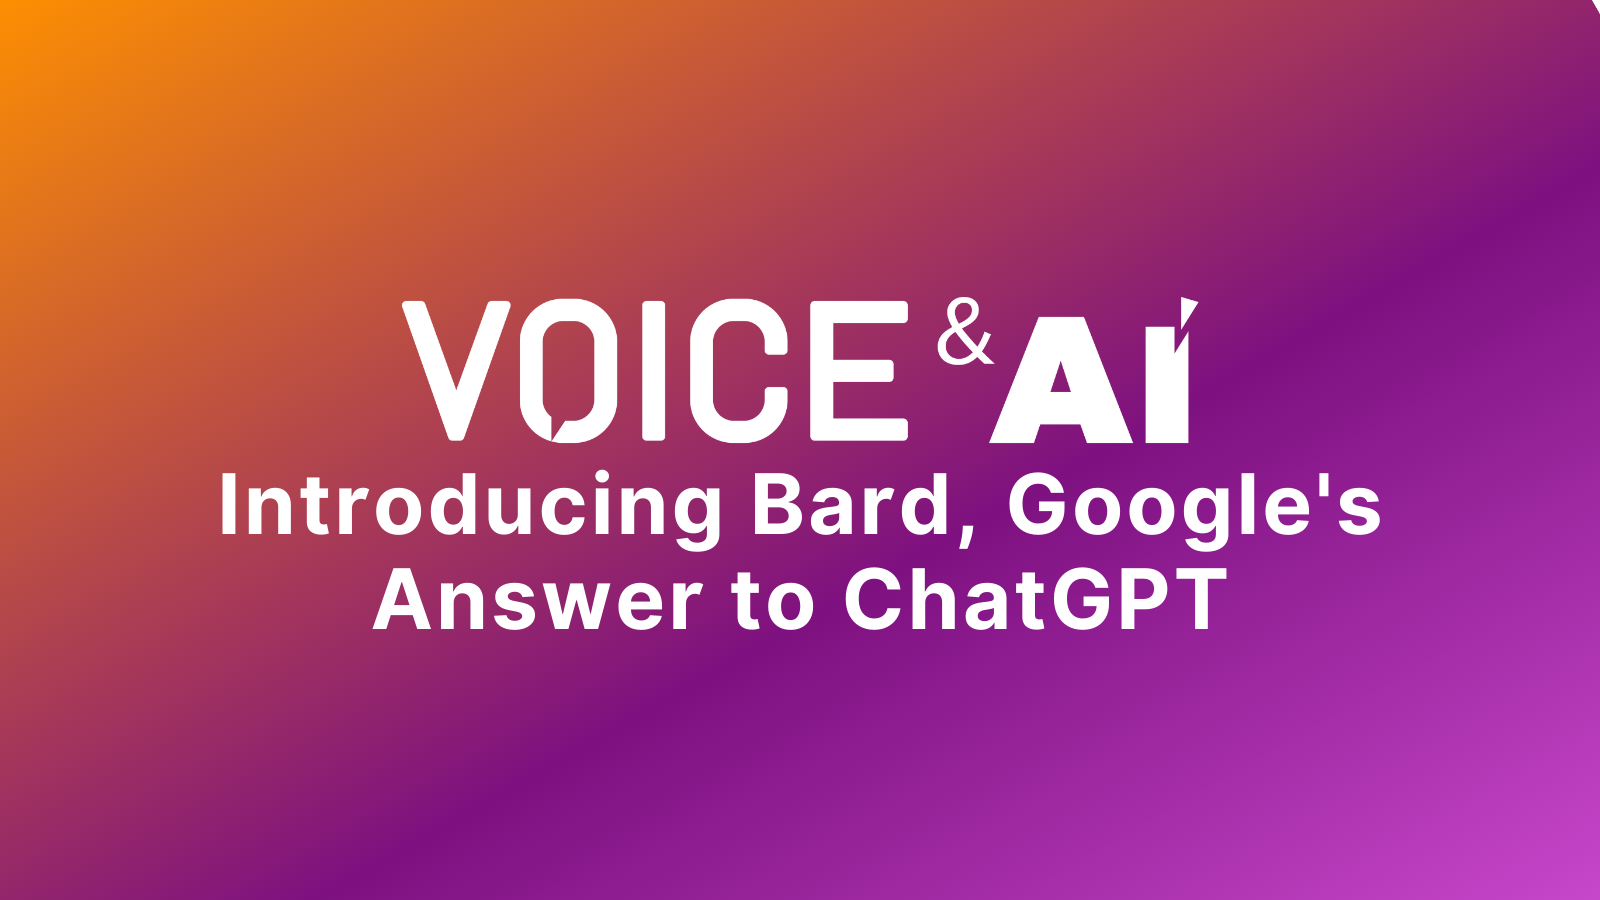 Introducing Bard, Google's Answer to ChatGPT